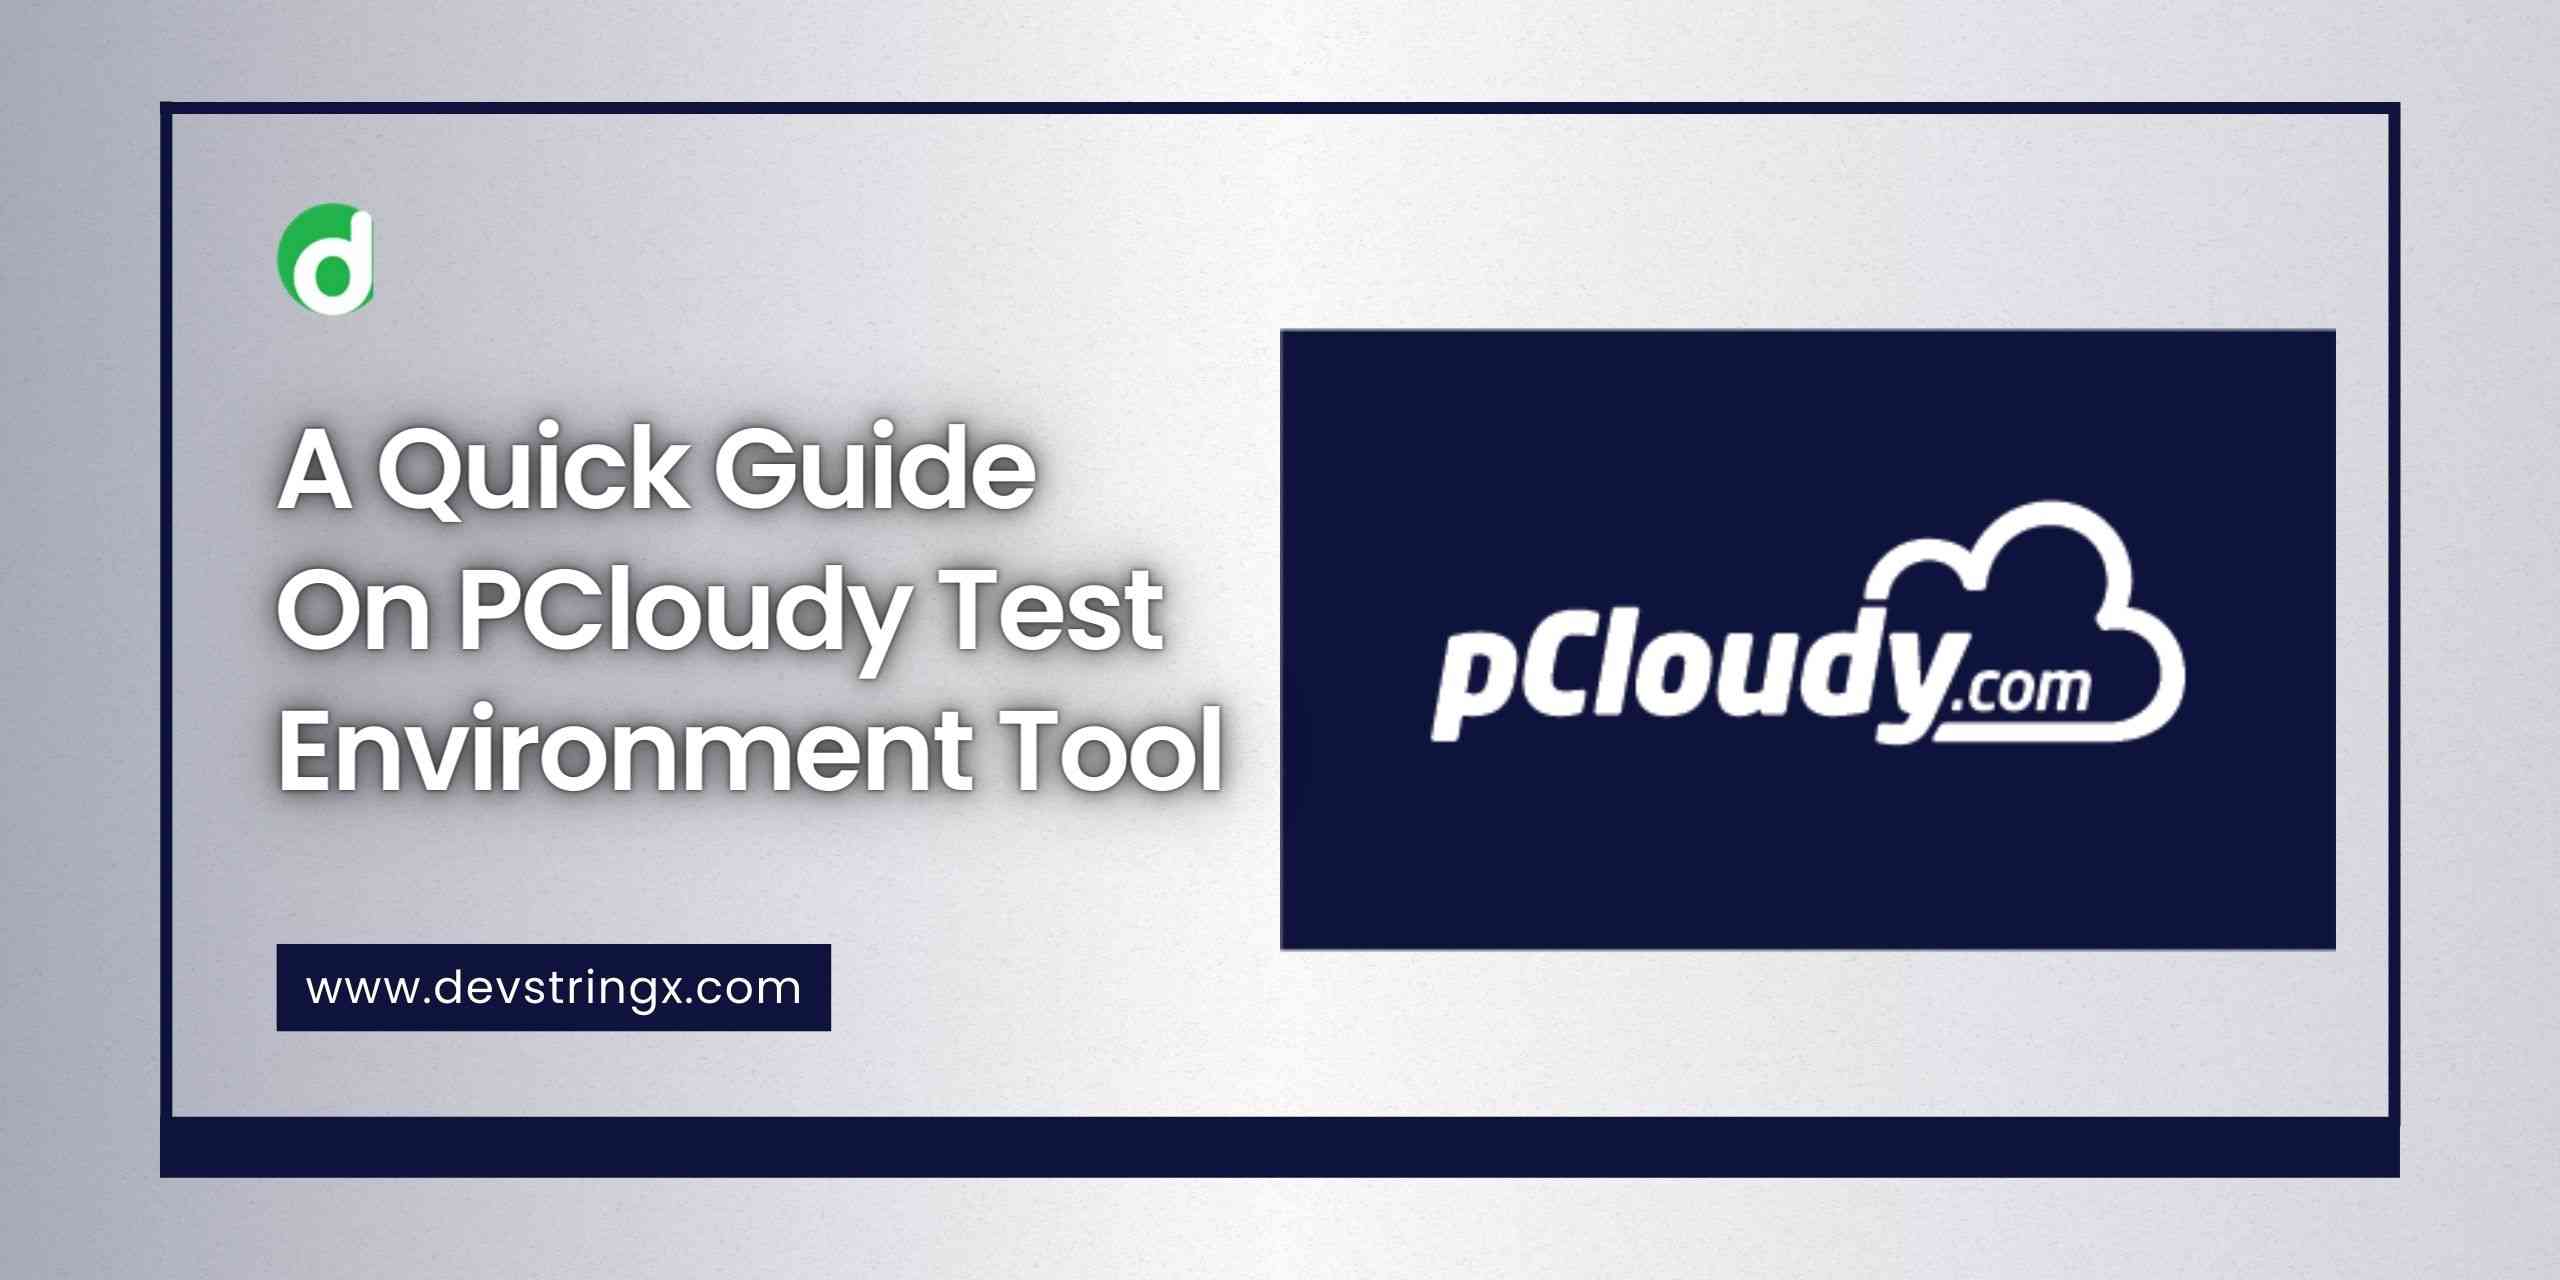 Feature image for pCloudy blog